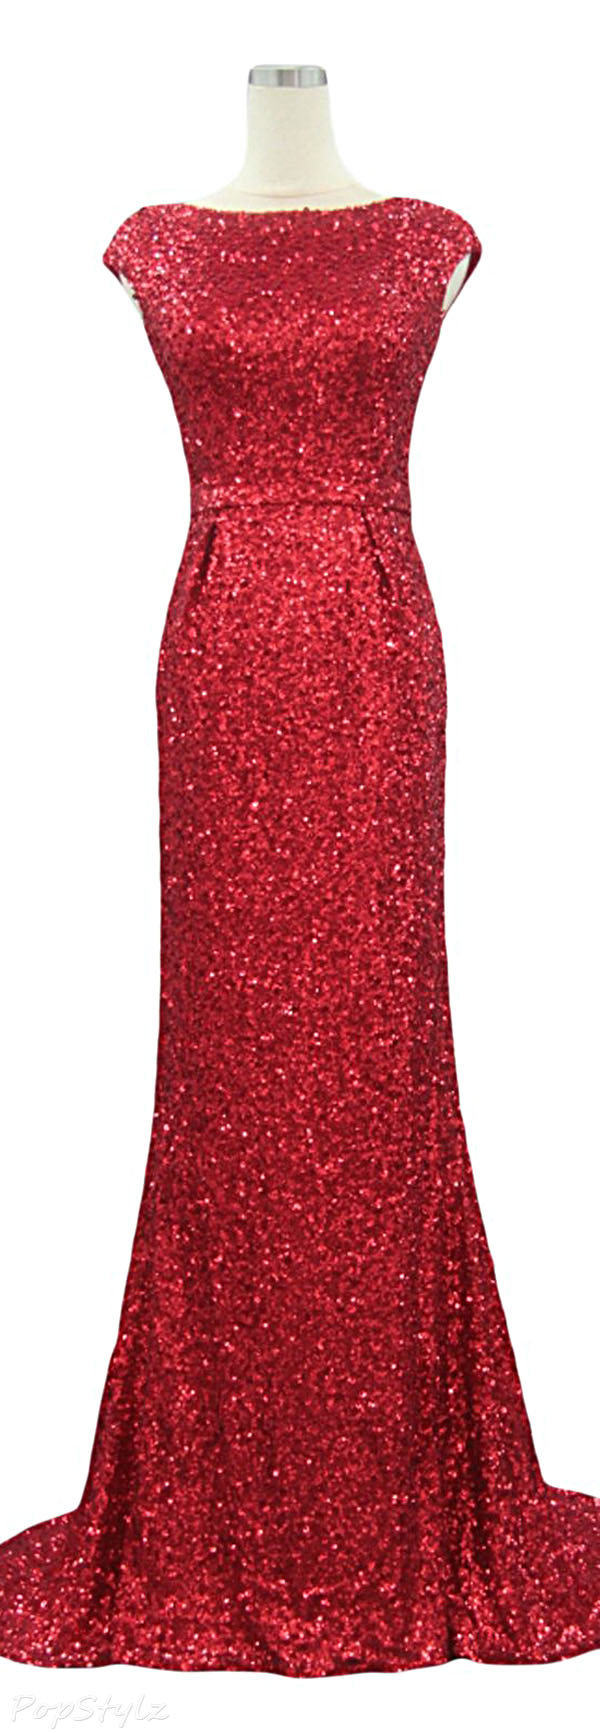 Sunvary Mermaid Sequin Long Formal Gown